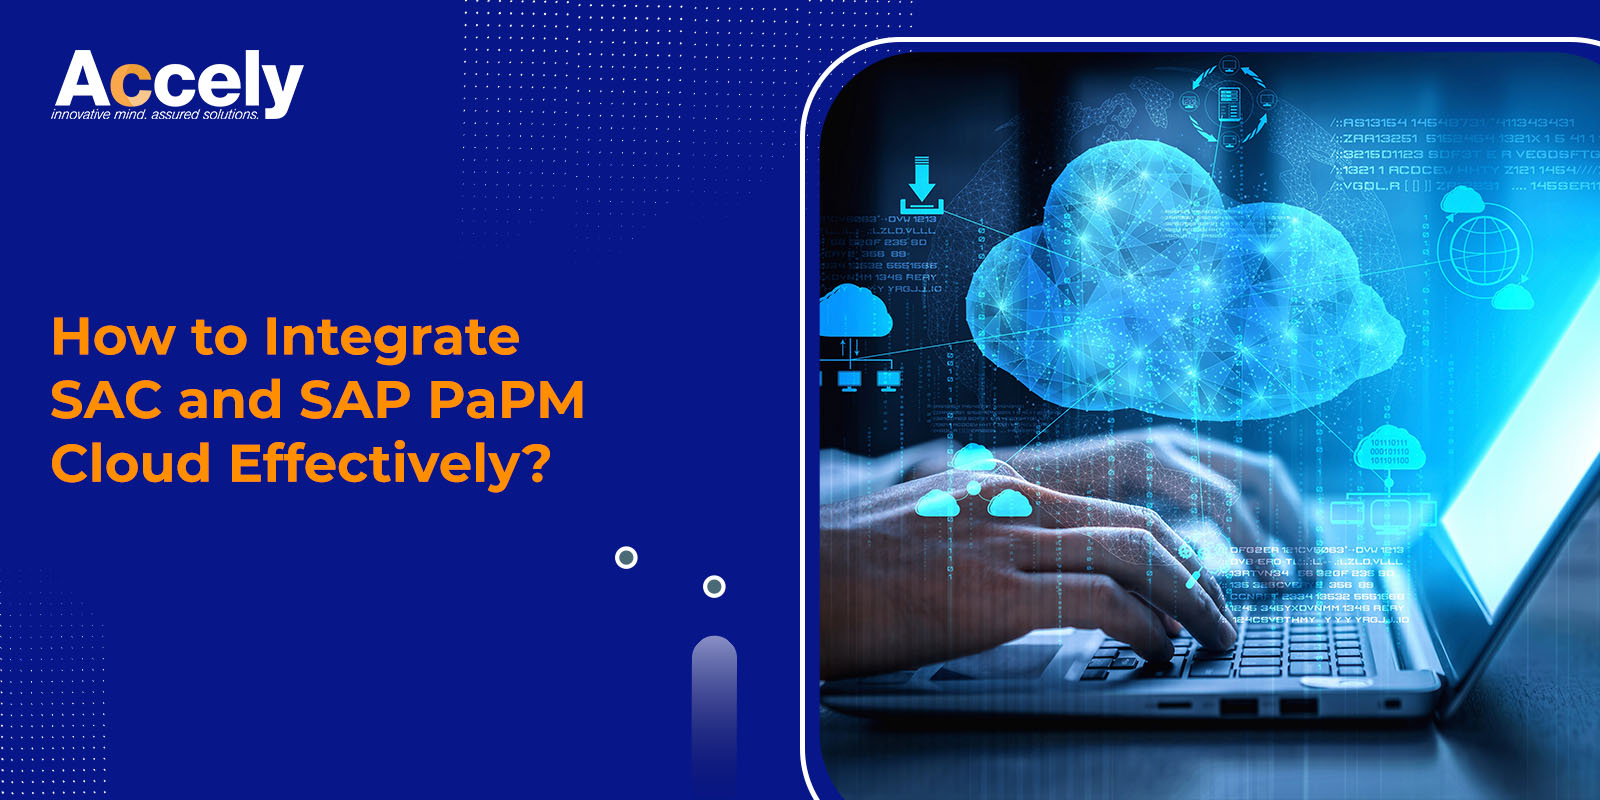 How to Integrate SAC and SAP PaPM Cloud Effectively